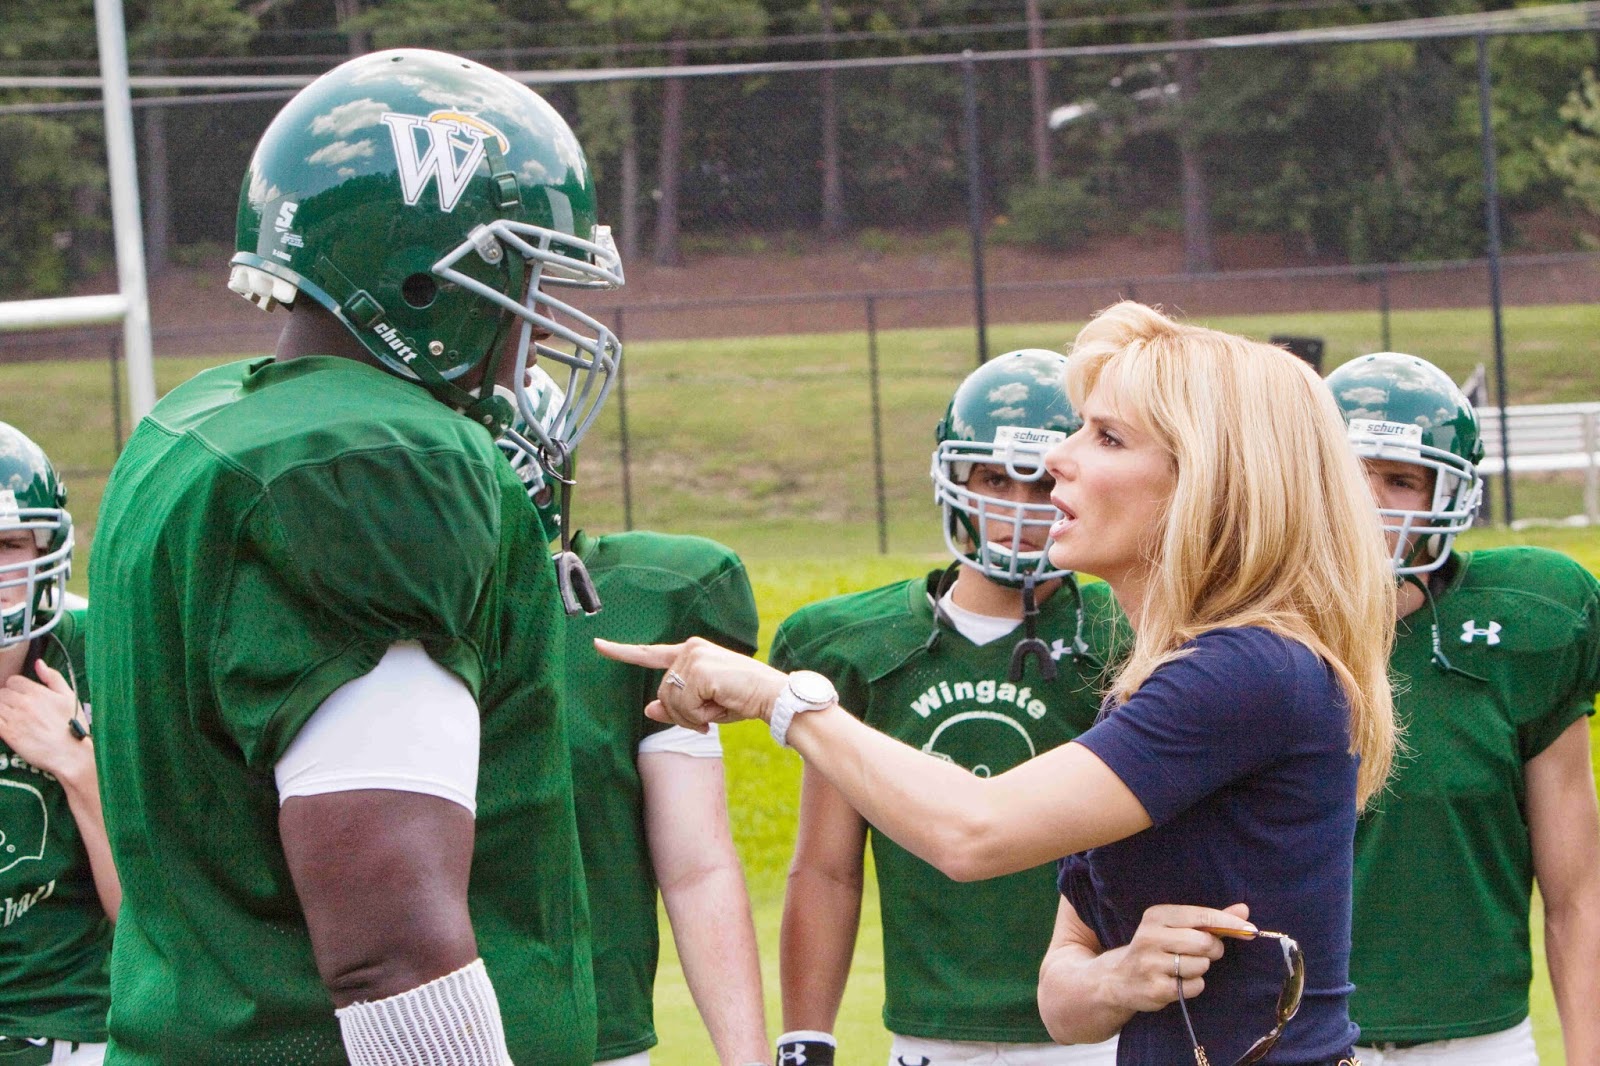 Women in Sports Week: ‘The Blind Side’: The Most Insulting Movie Ever